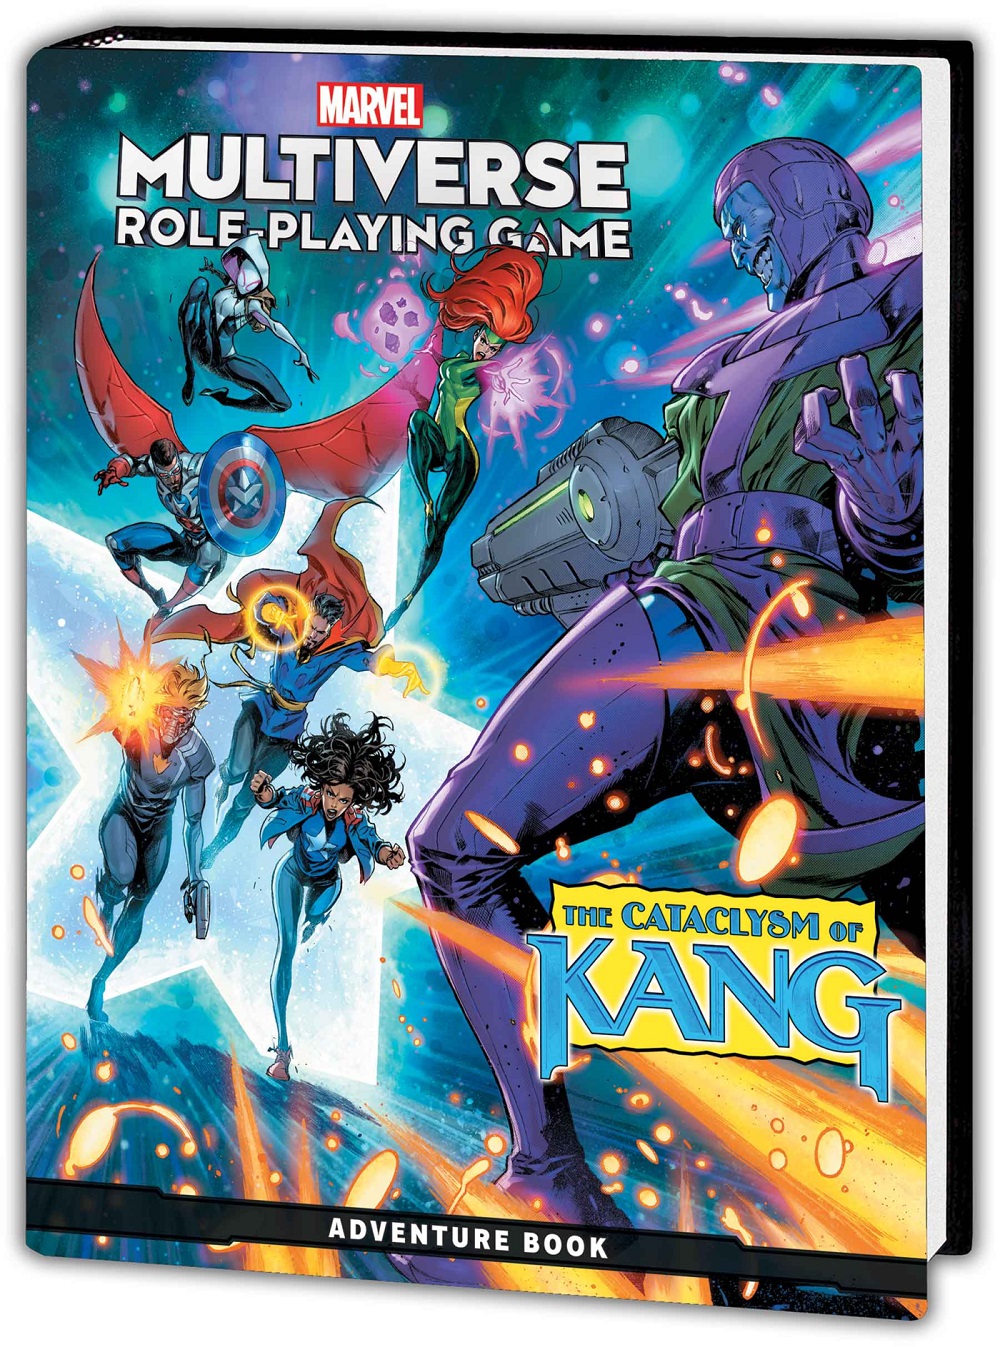 Marvel Multiverse RPG: Adventure Book: The Cataclysm of Kang 